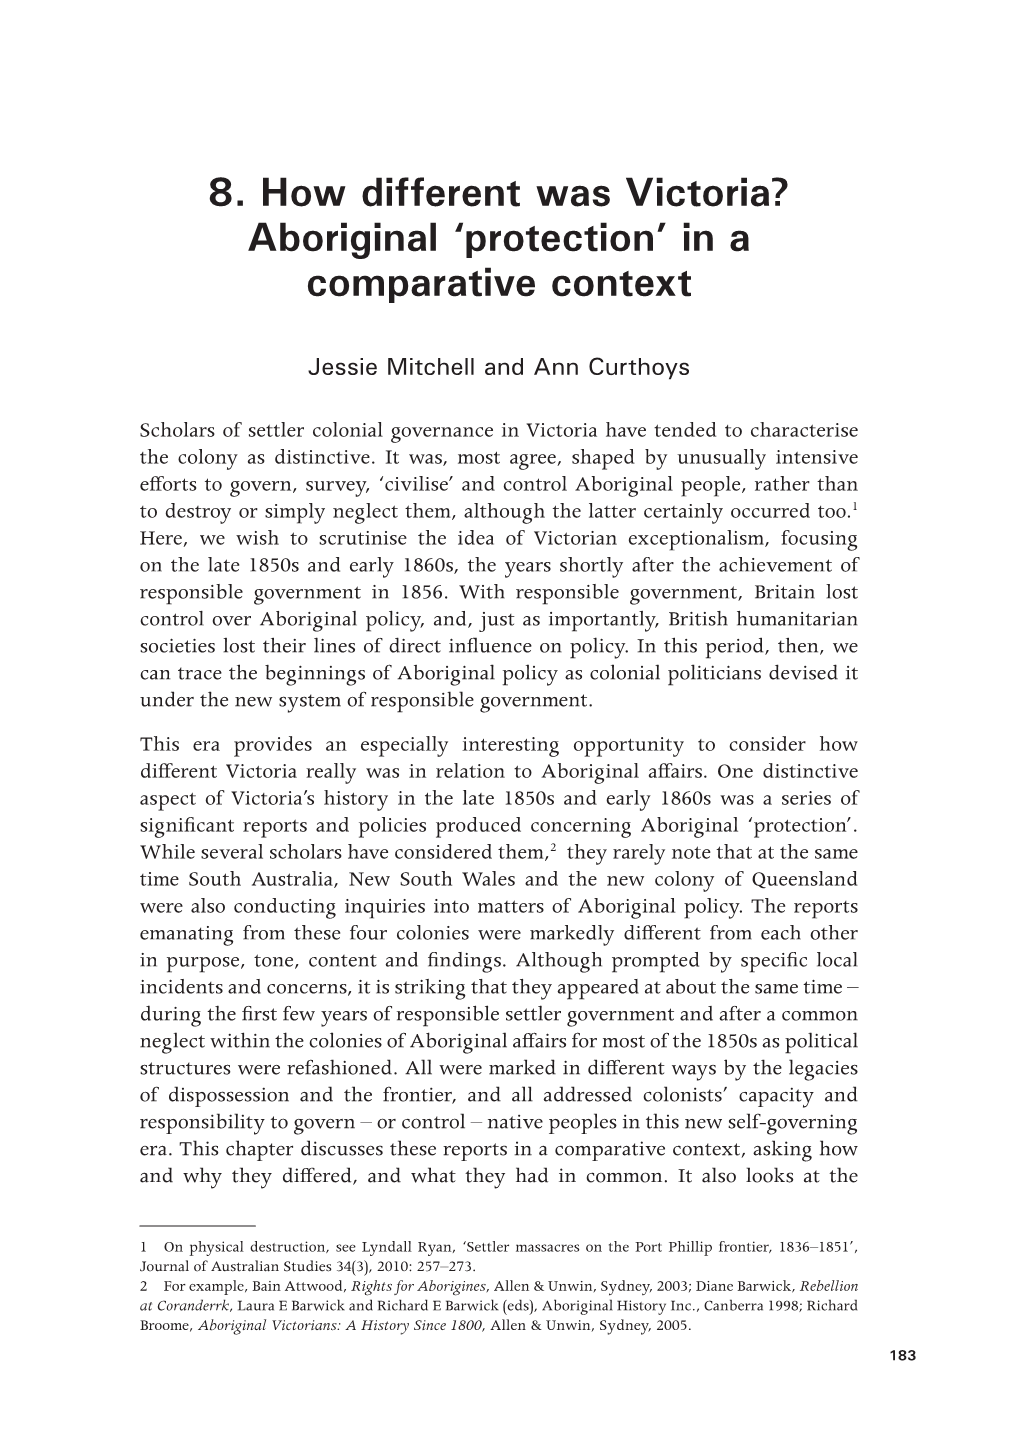 8. How Different Was Victoria? Aboriginal 'Protection' in a Comparative Context